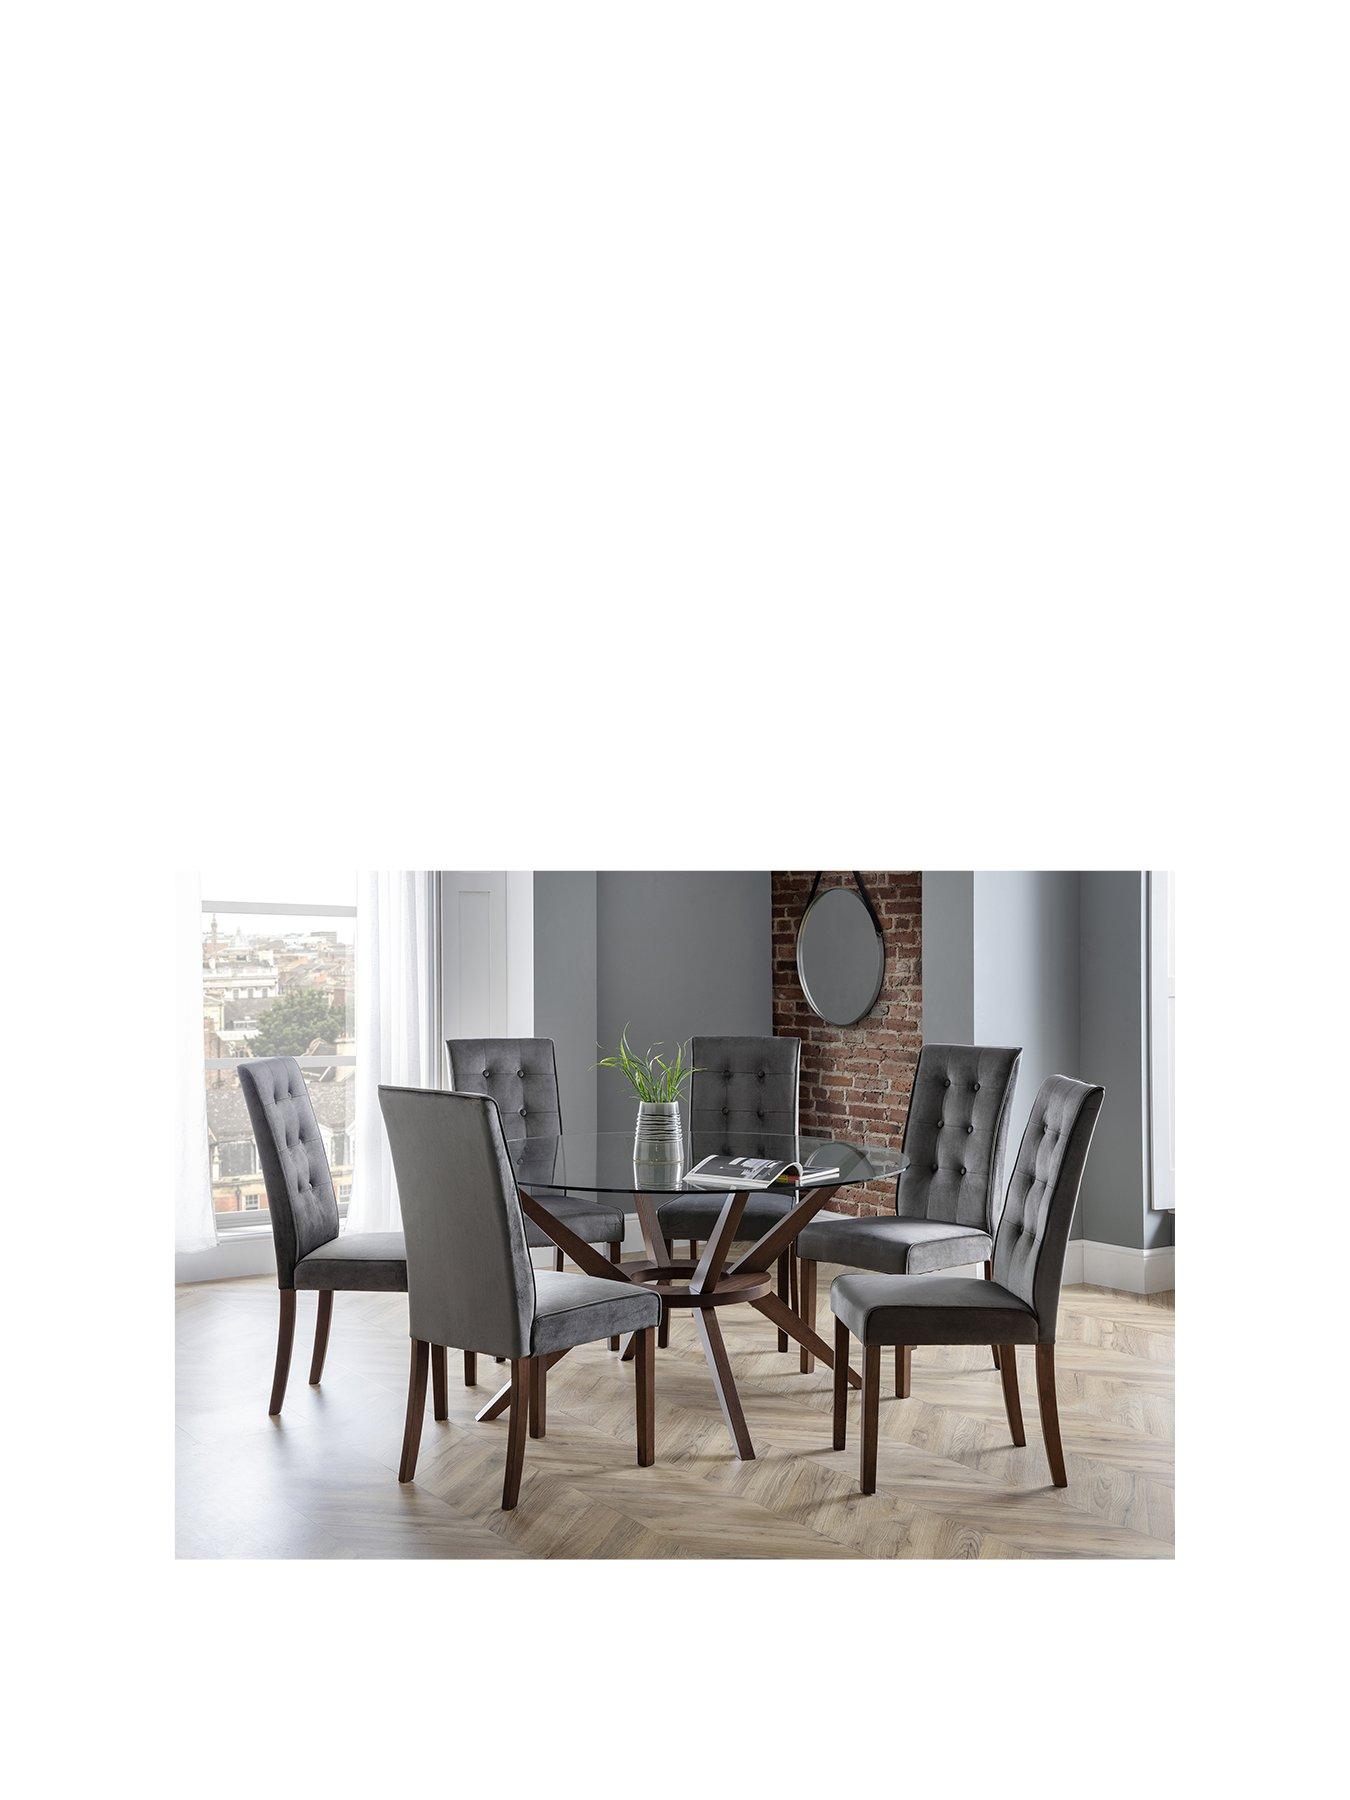 Julian Bowen Chelsea 140 Cm Round Glass Dining Table + 6 Madrid Chairs